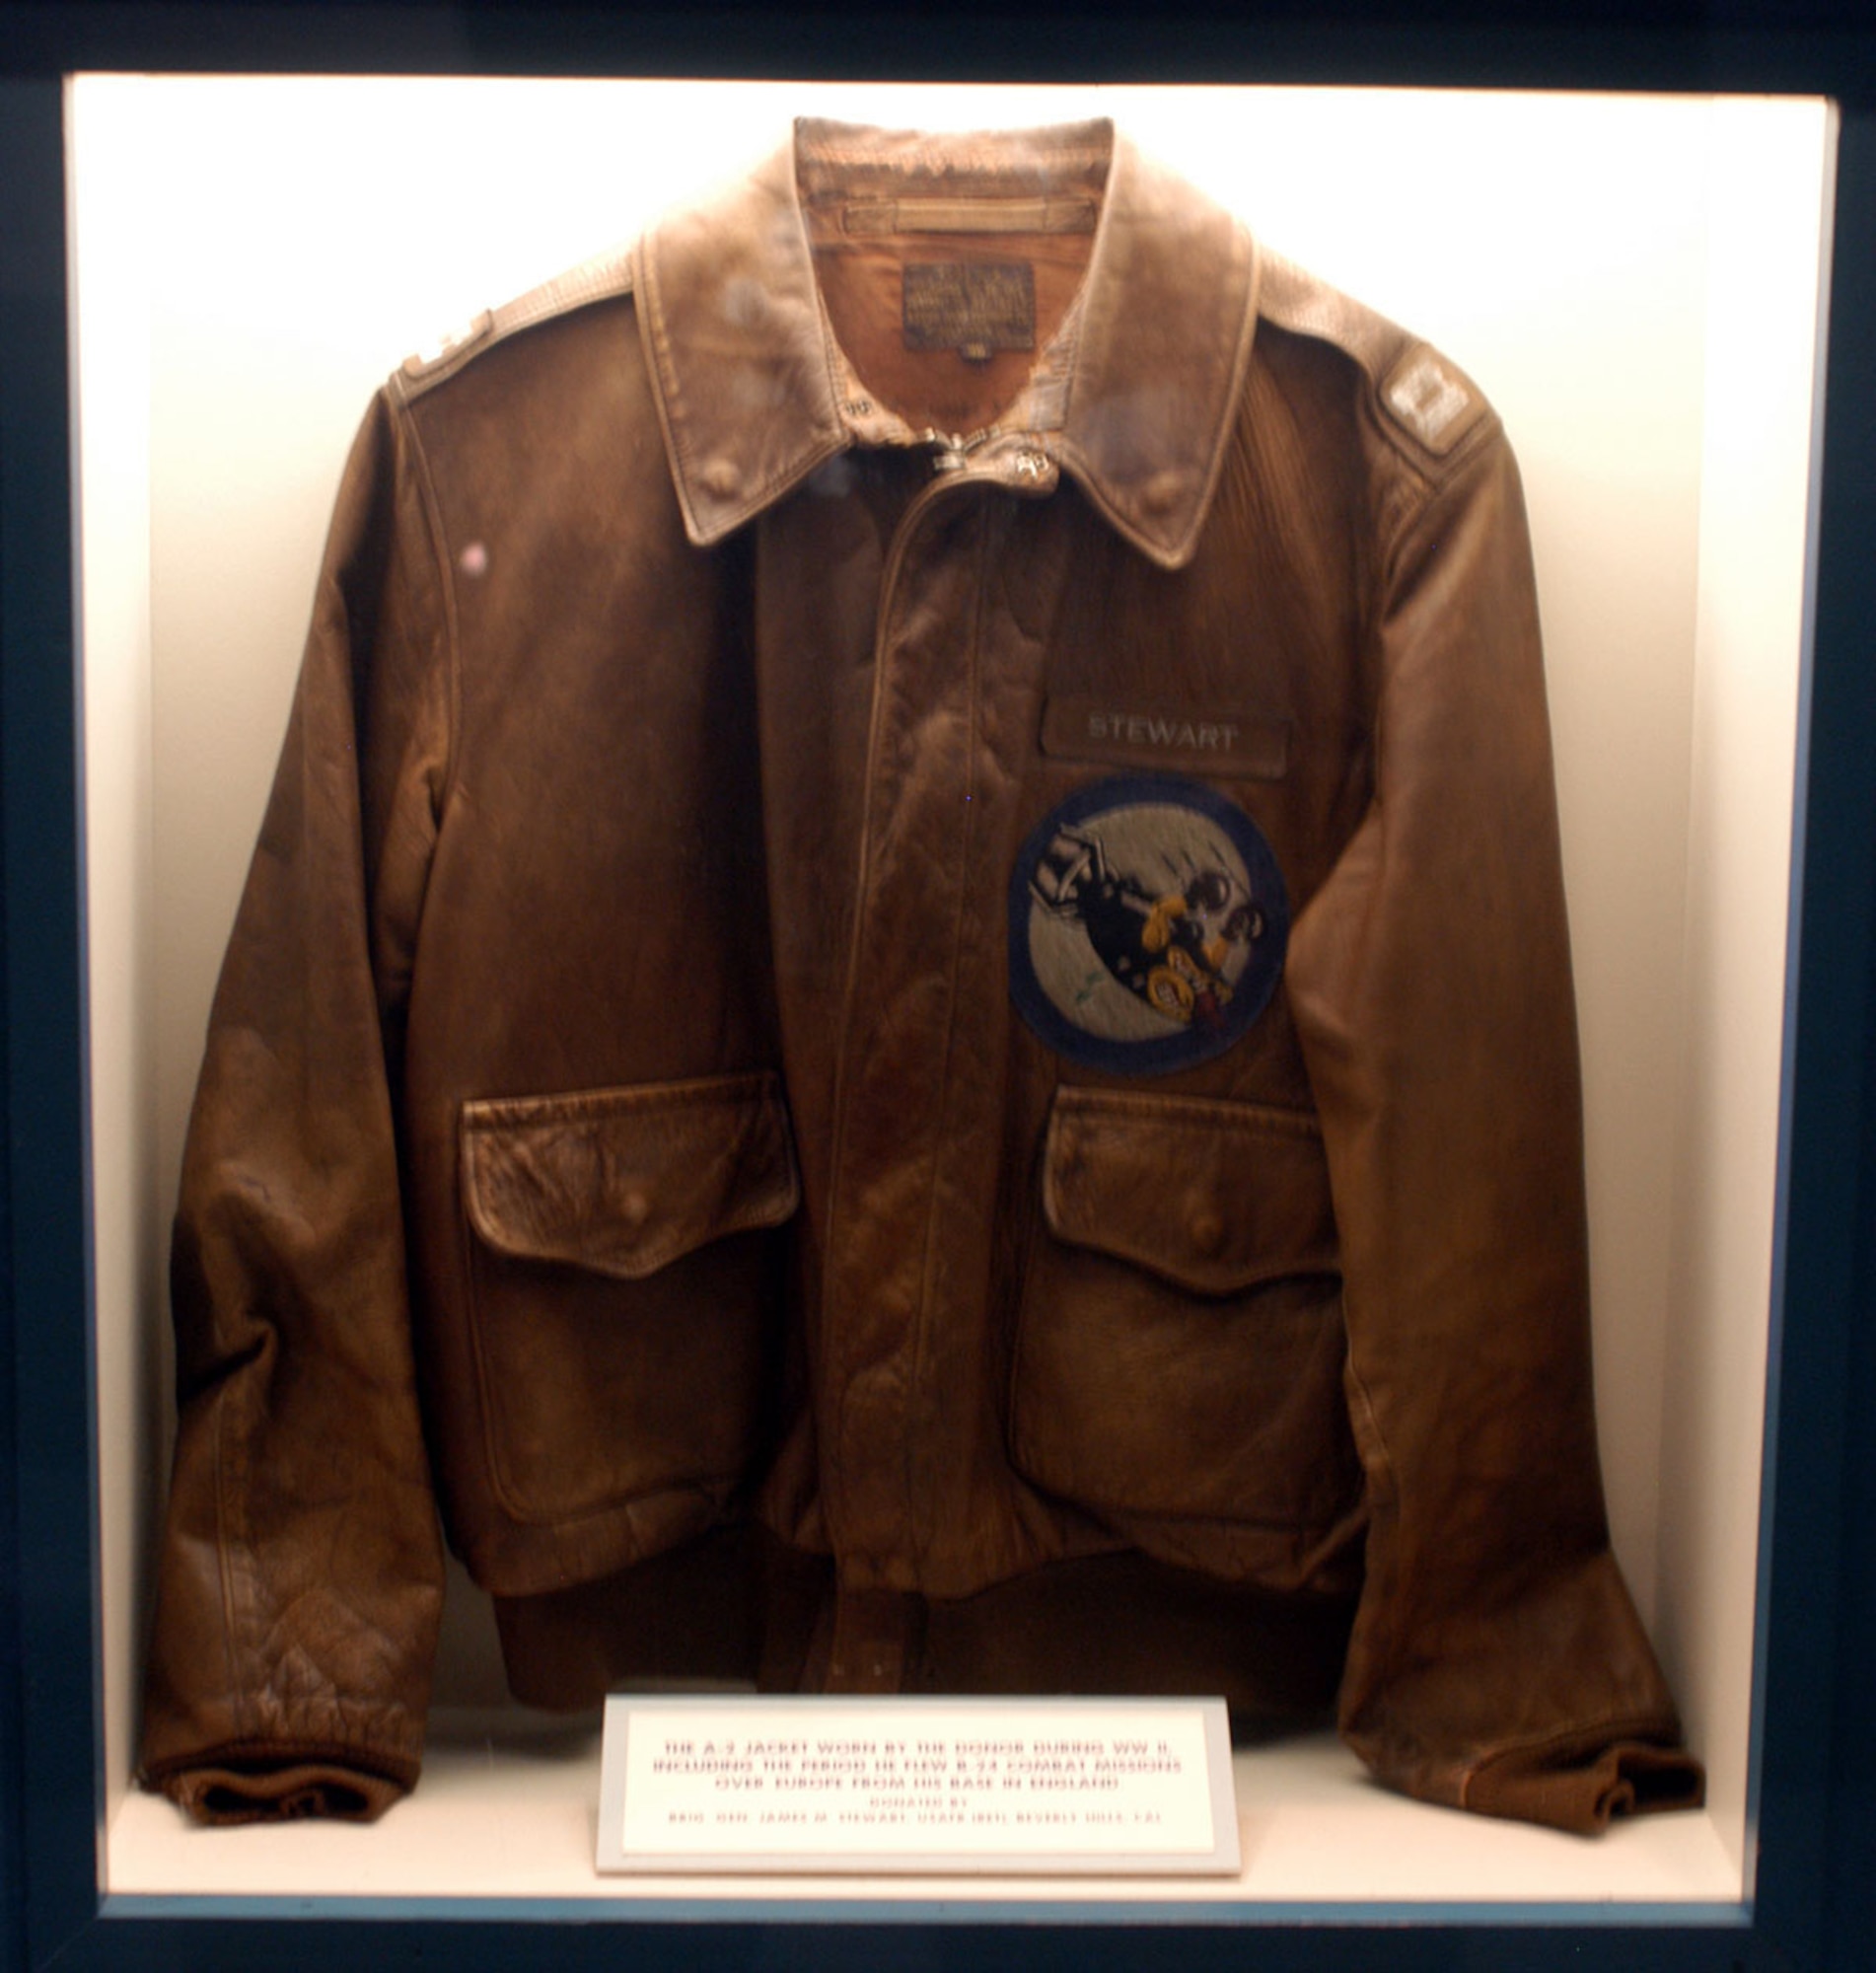 DAYTON, Ohio -- Brig. Gen. James Stewart's jacket in on display with the Celebrities in Uniform exhibit in the World War II Gallery at the National Museum of the United States Air Force. (U.S. Air Force photo)